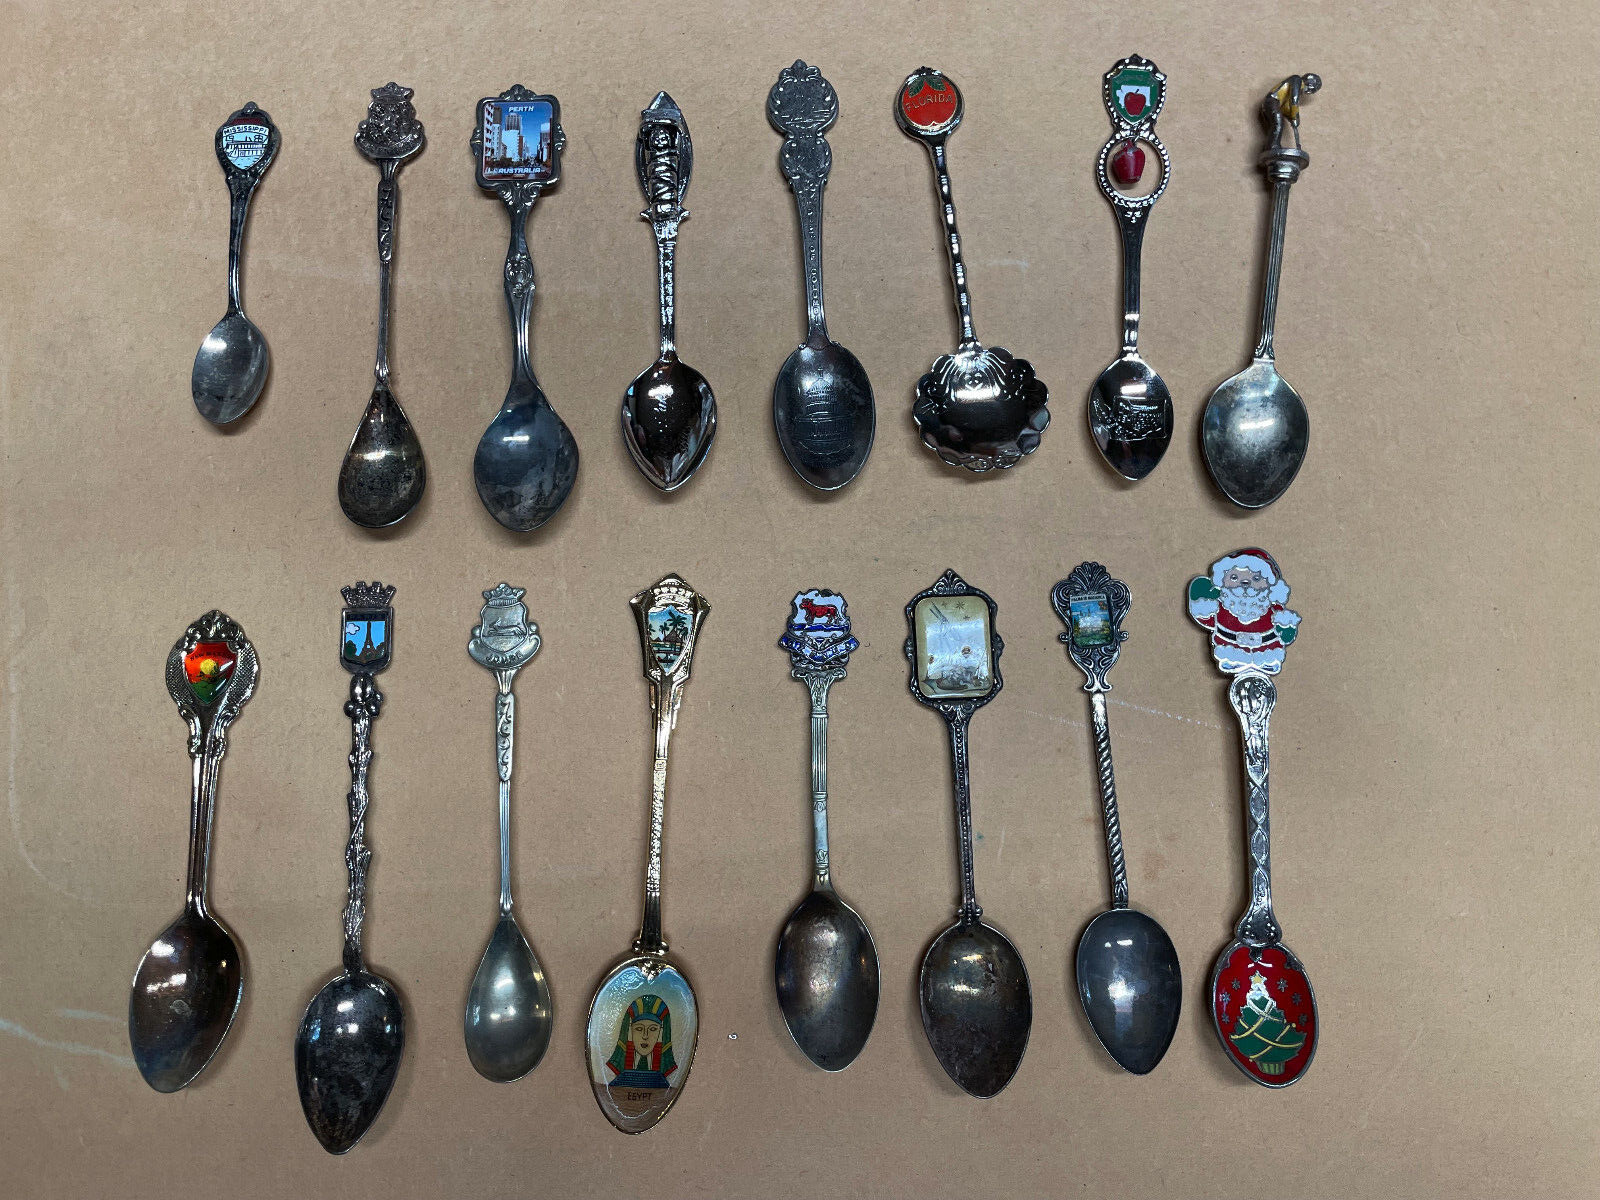 Lot of Collectible spoons from U.S. states and other countries